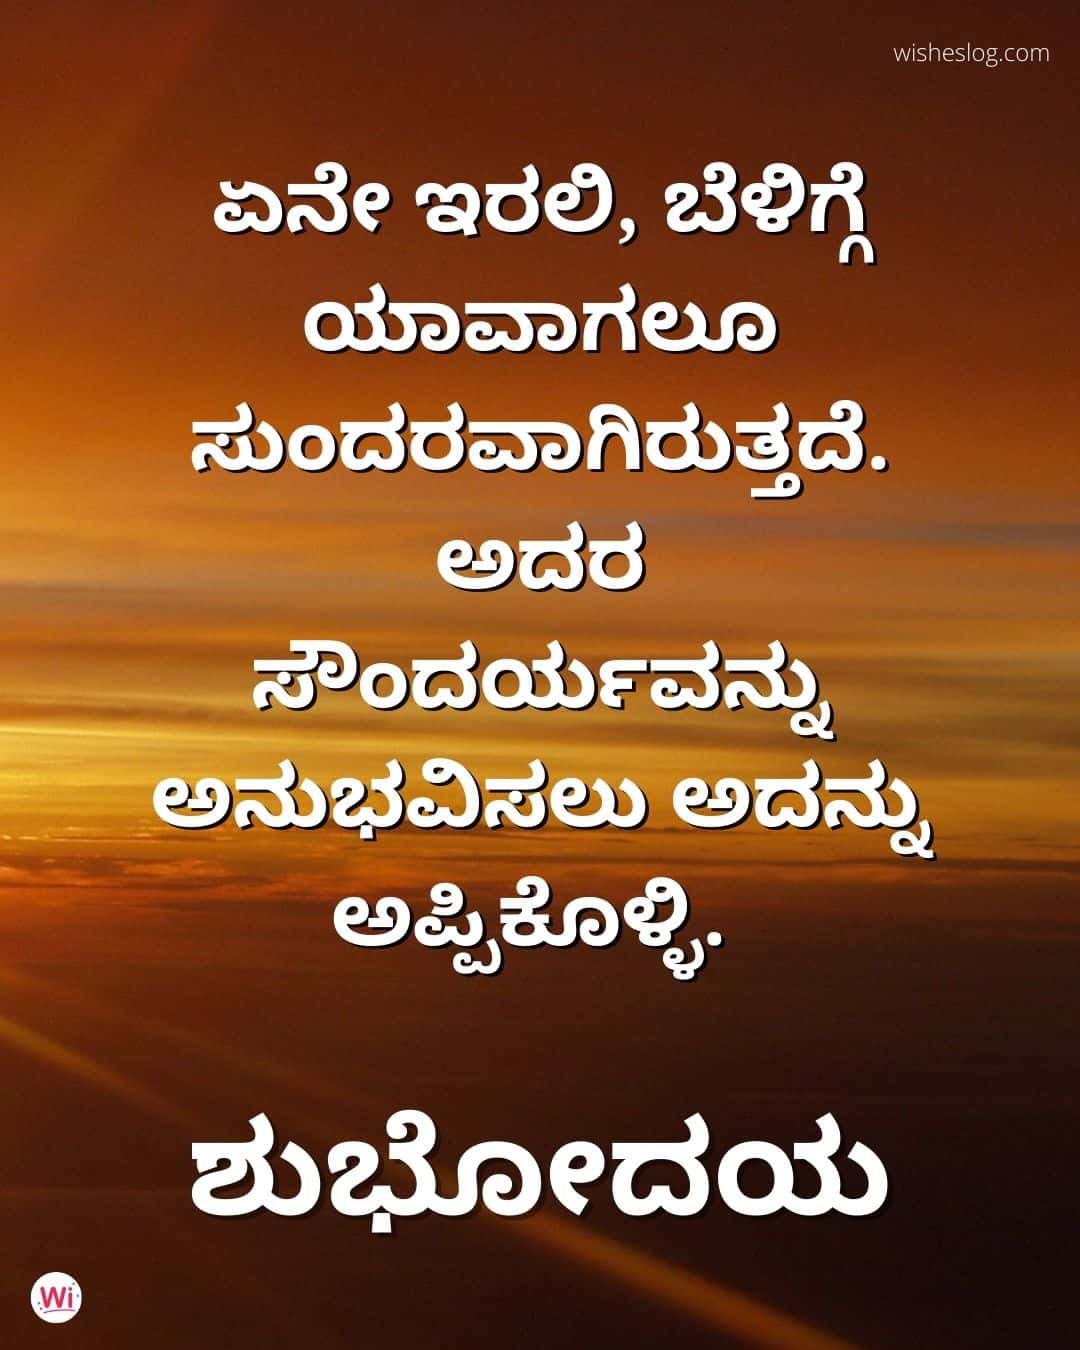 Morning Wishes In Kannada